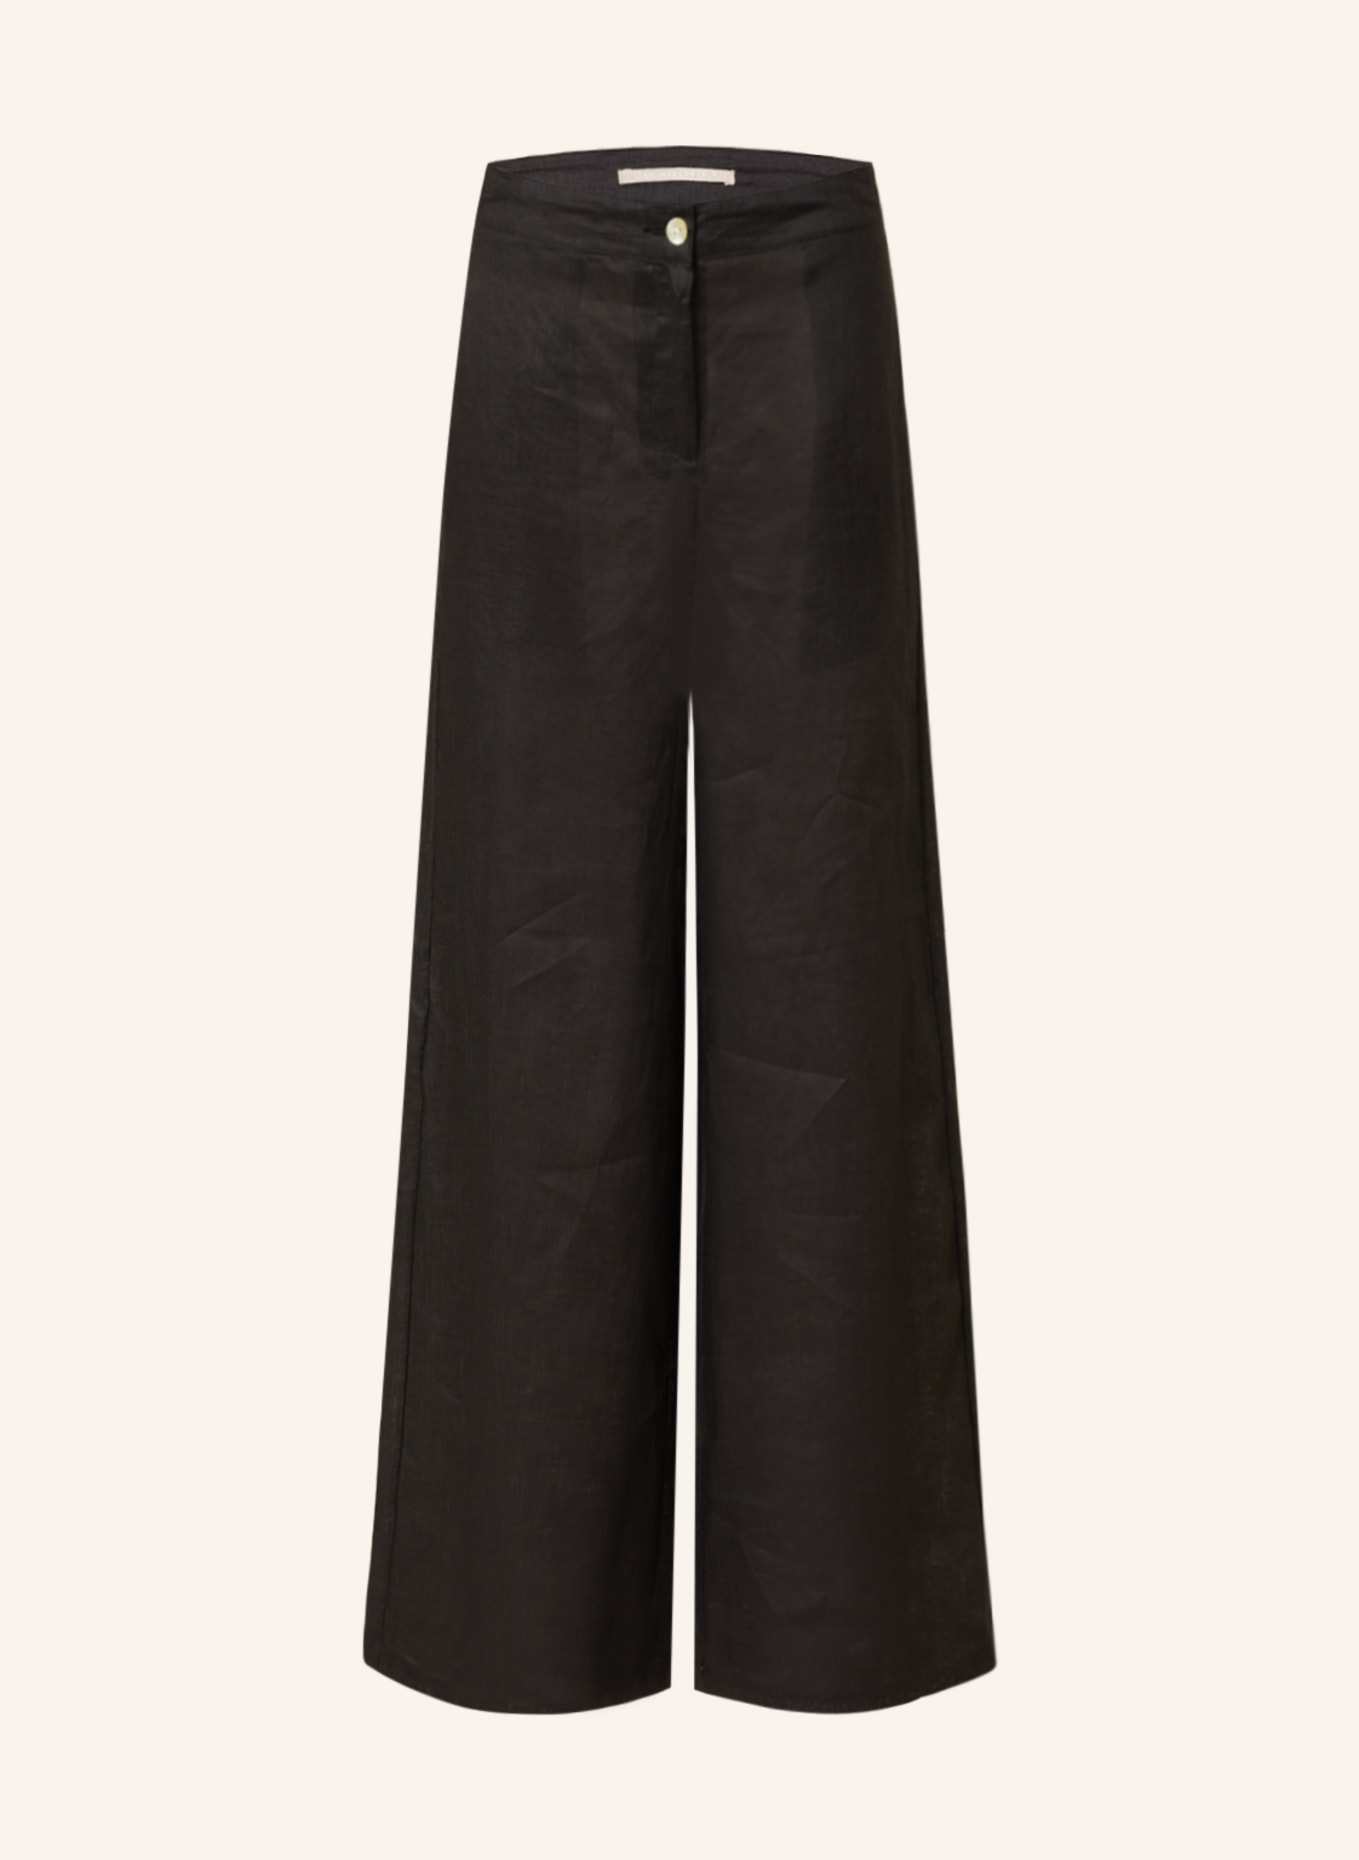 (THE MERCER) N.Y. Wide leg trousers made of linen, Color: BLACK (Image 1)